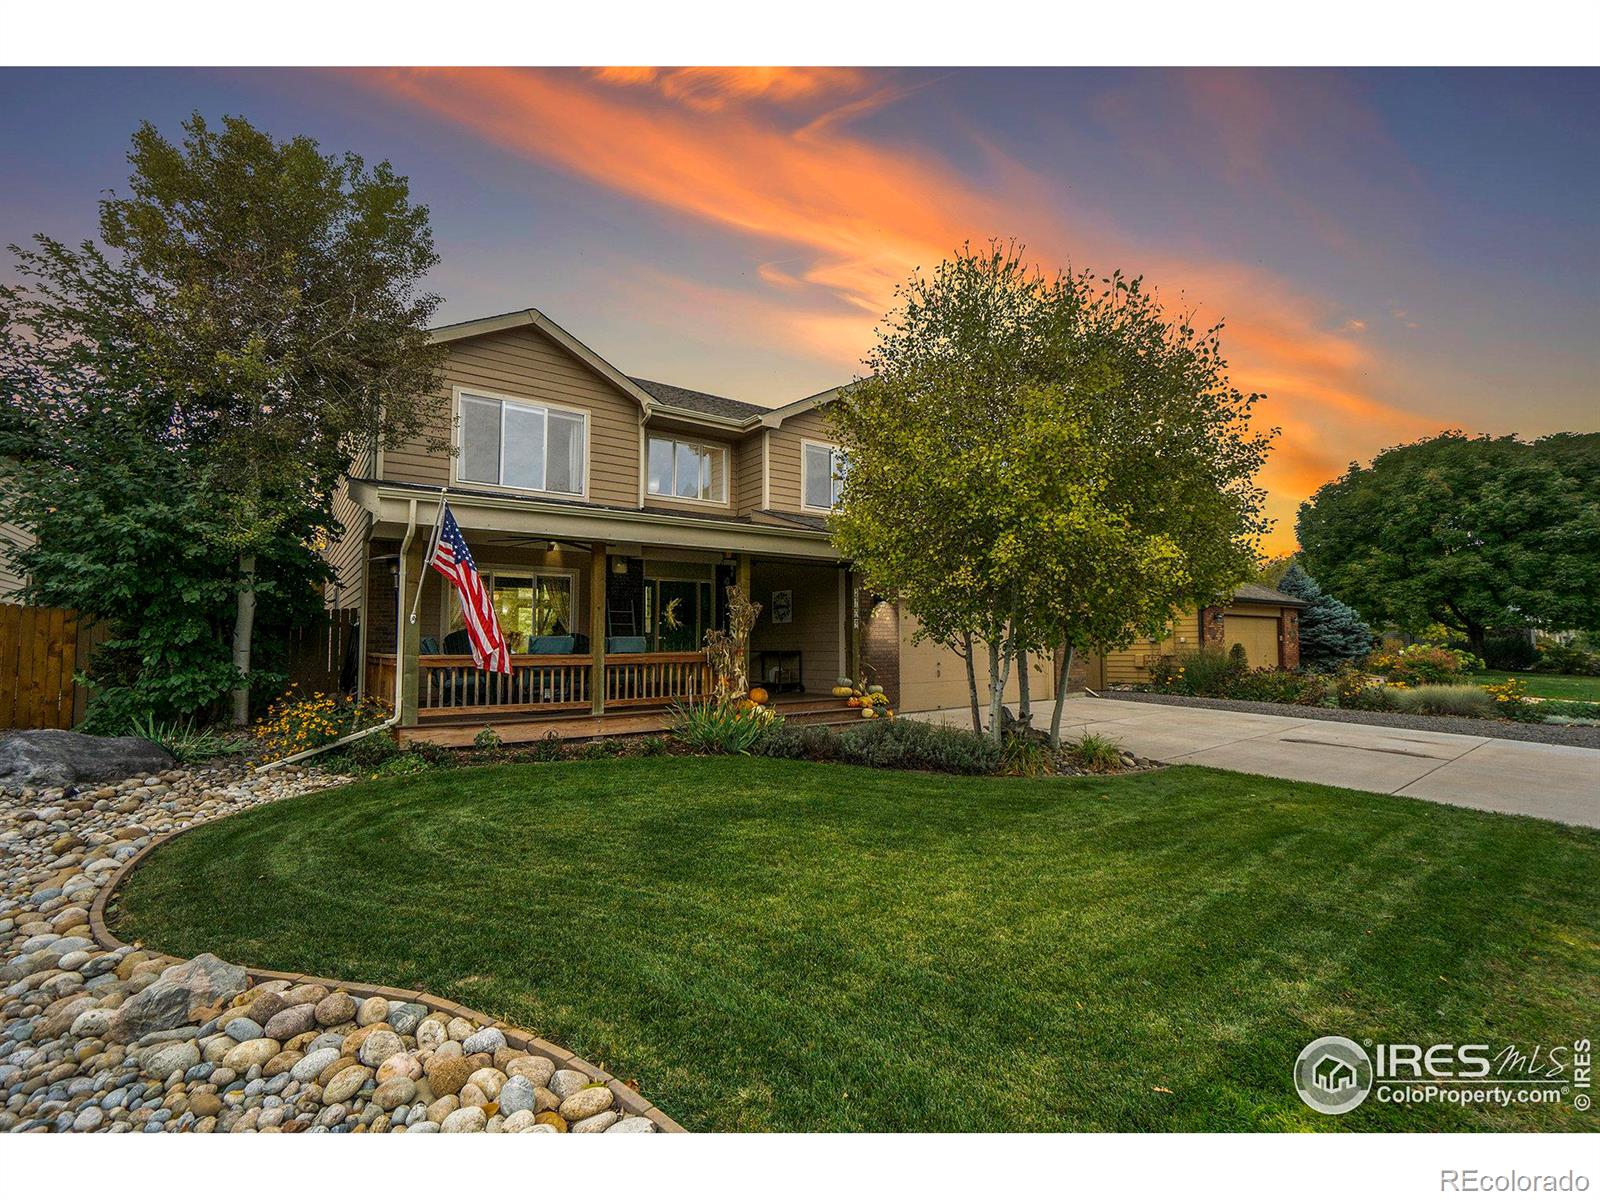 2709  stonehaven drive, Fort Collins sold home. Closed on 2024-02-29 for $775,000.